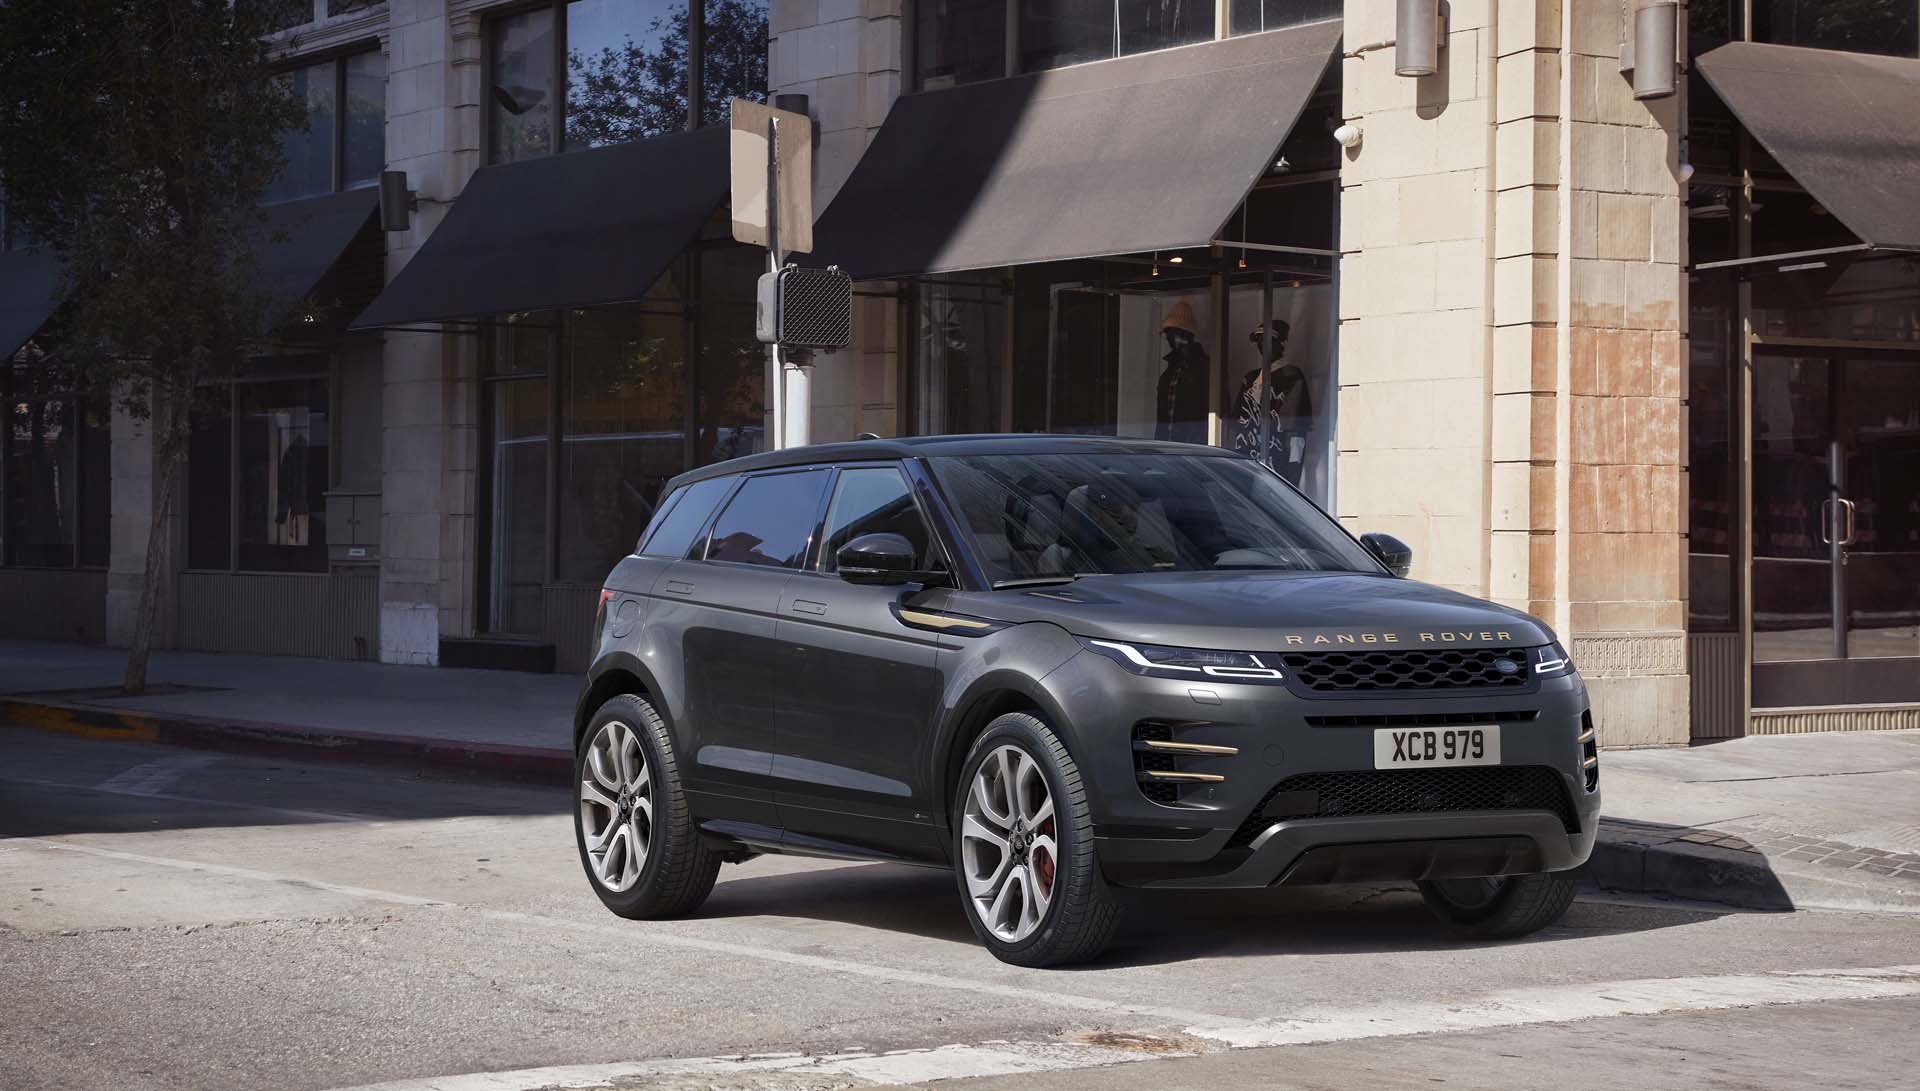 2021 Land Rover Range Rover Evoque Review, Ratings, Specs, Prices